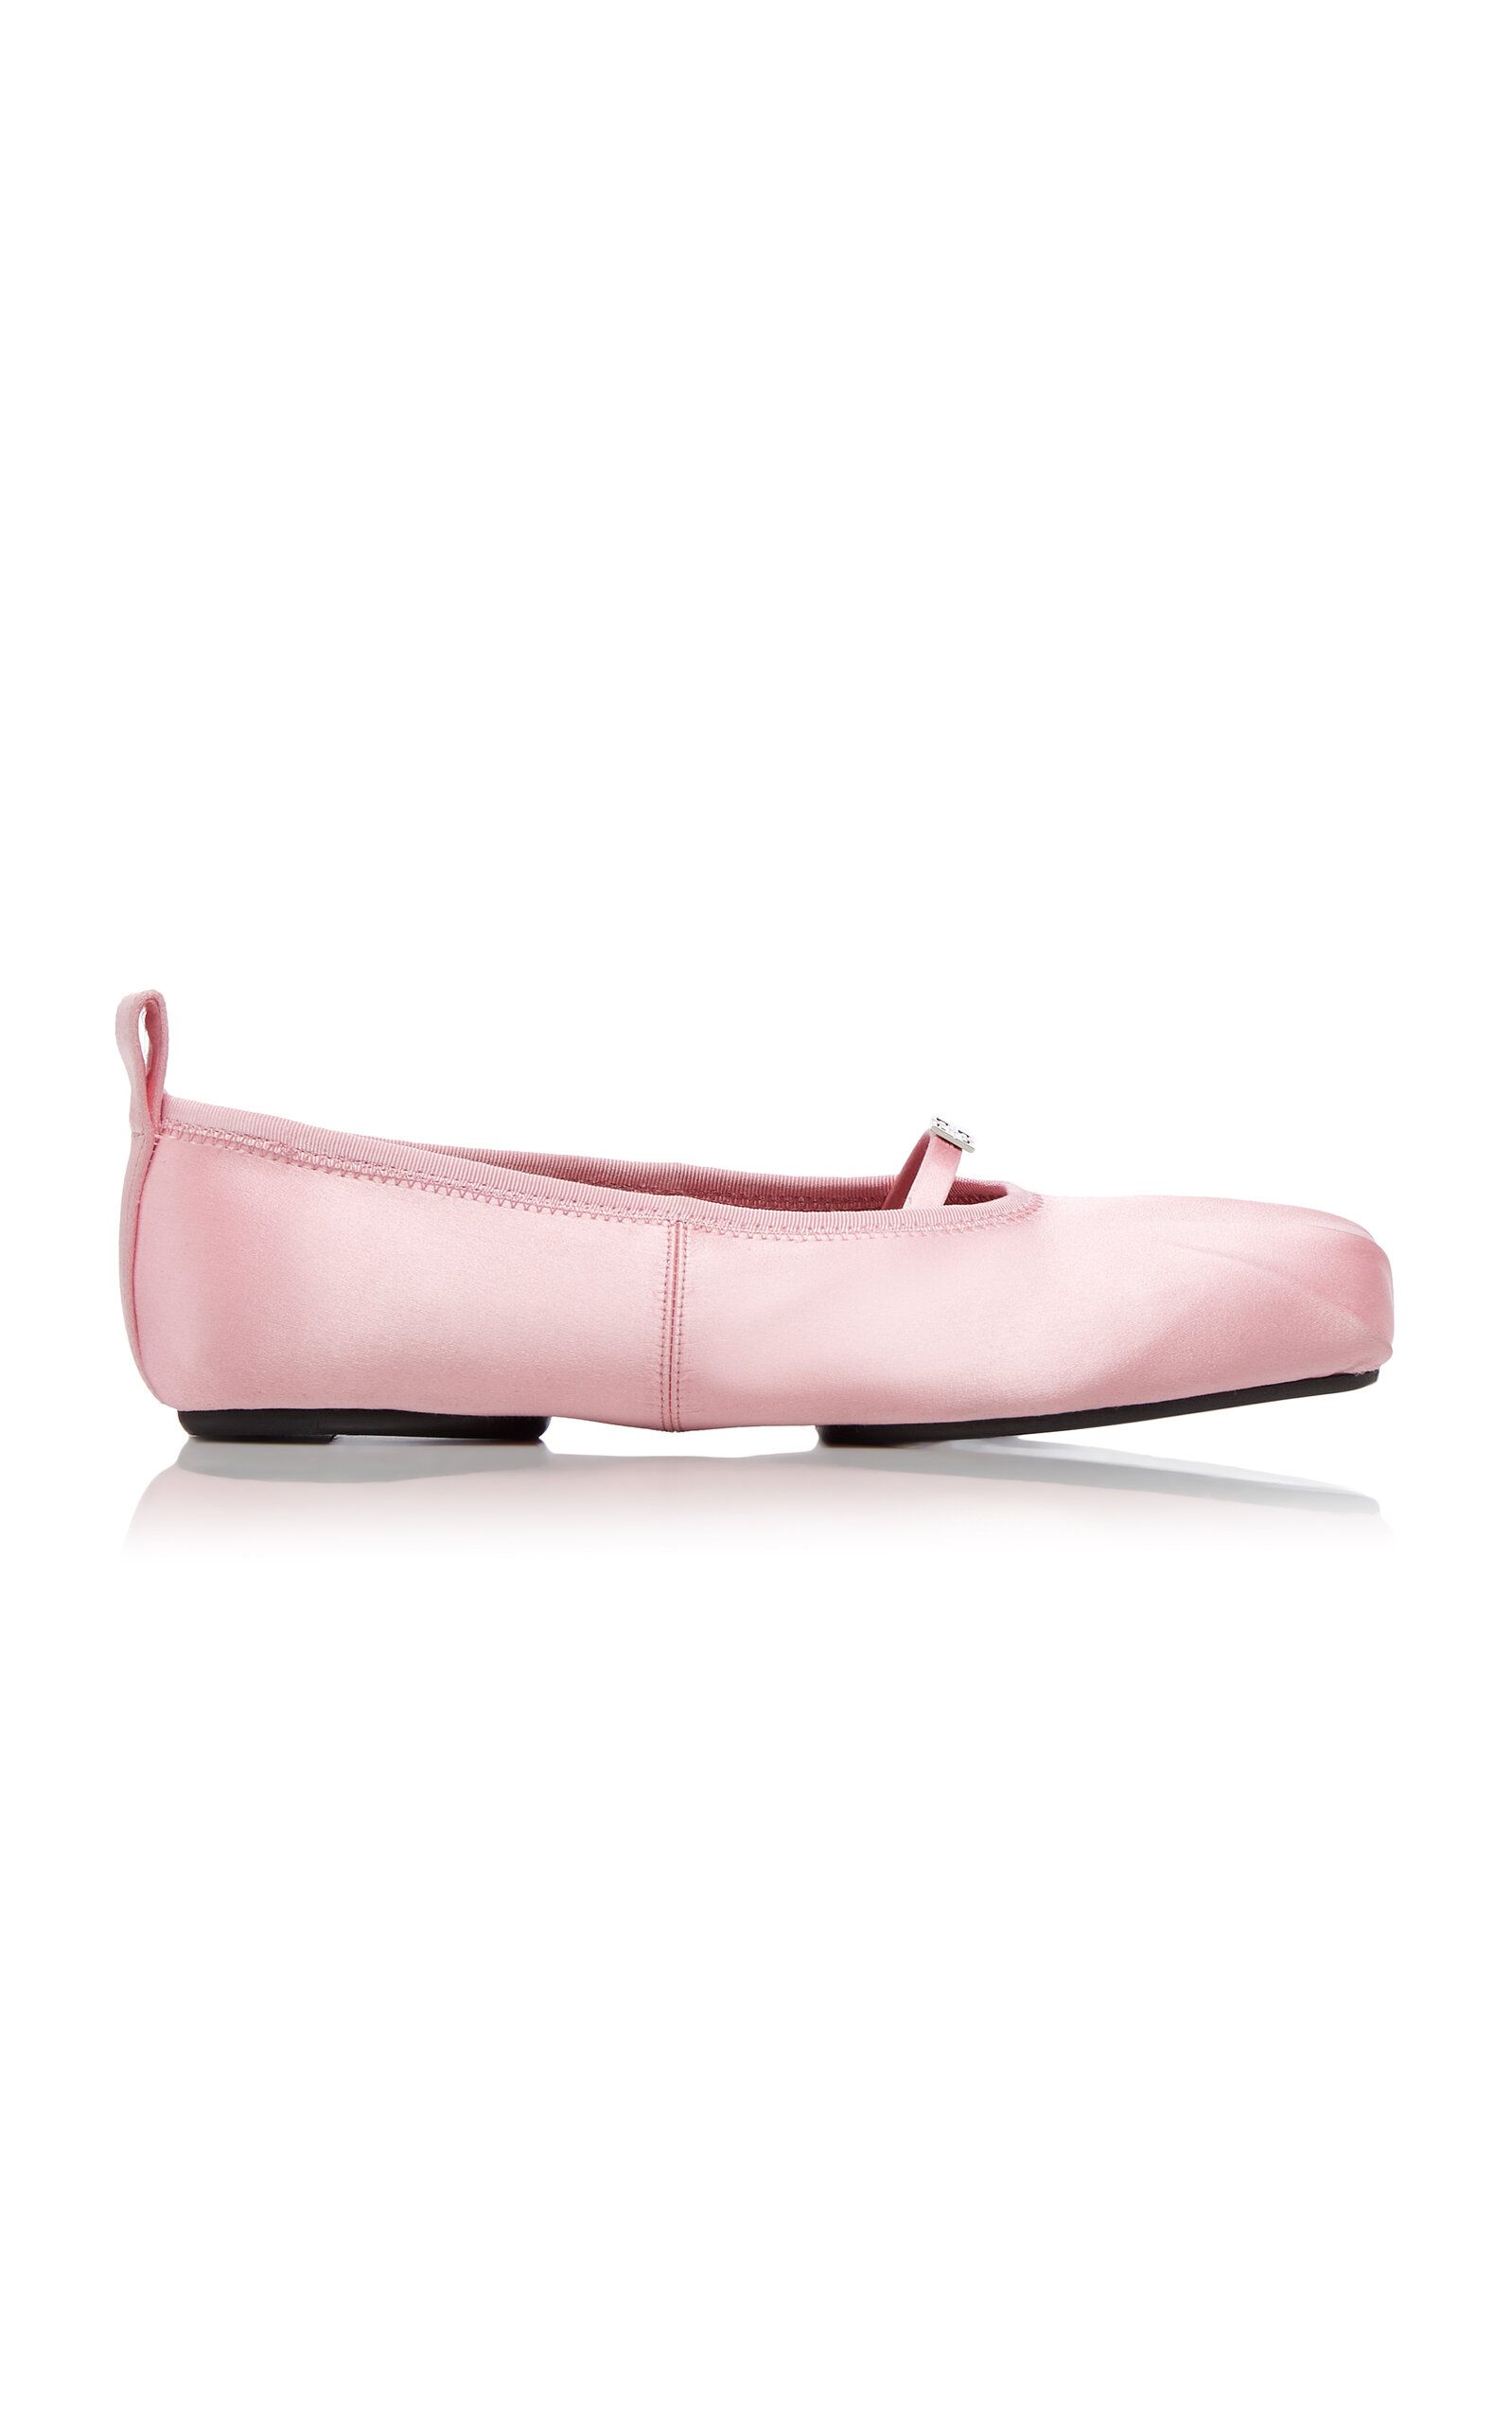 Givenchy Satin Ballet Flats In Pink